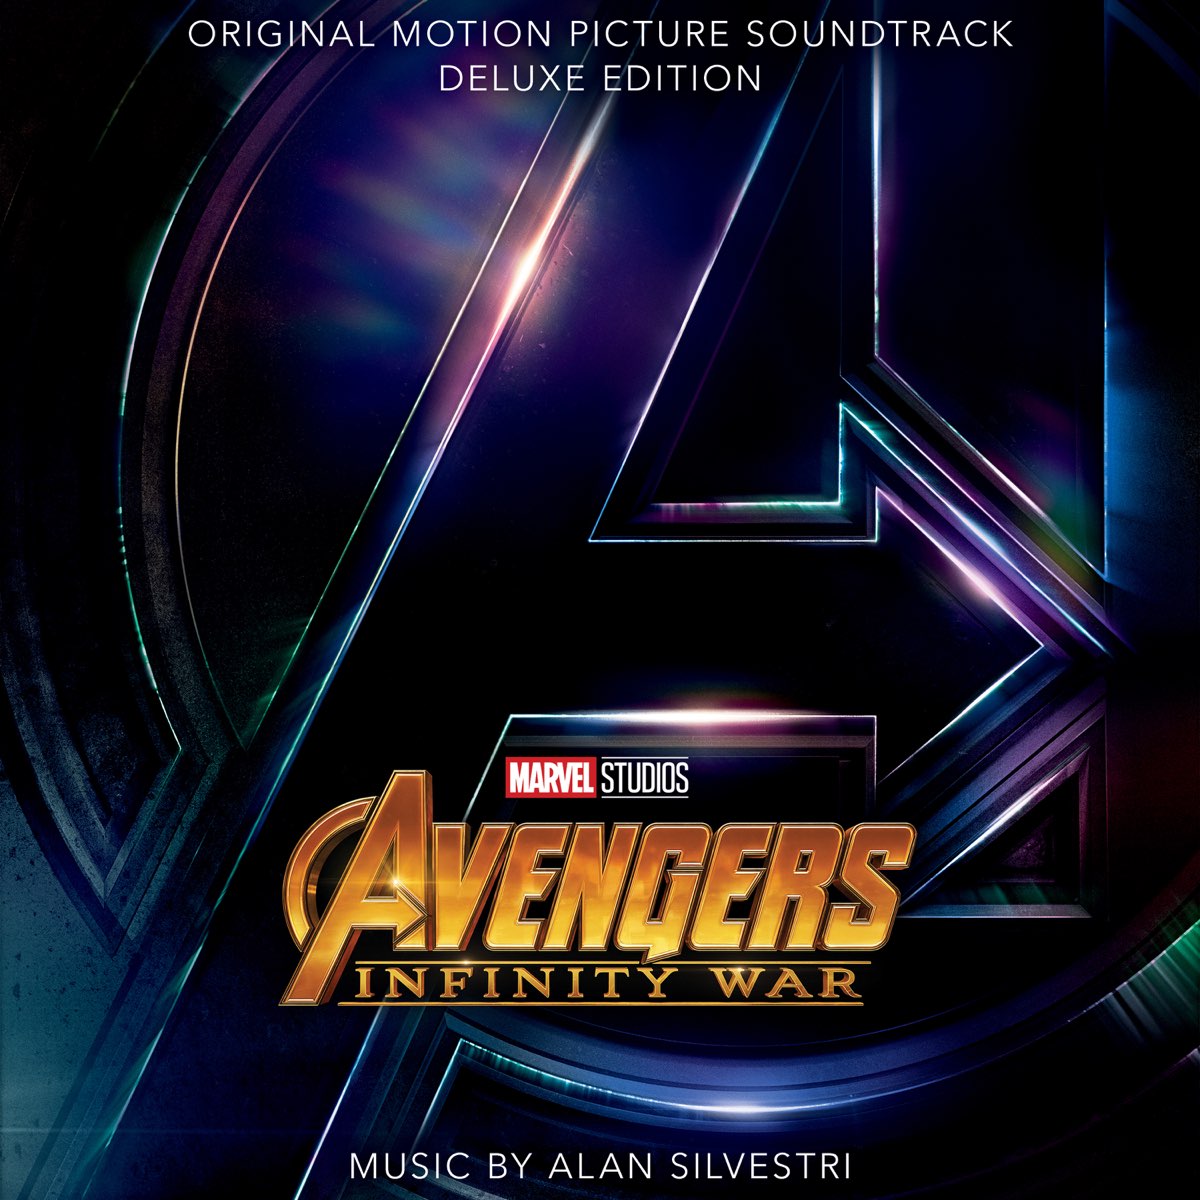 Avengers: Infinity War (Original Motion Picture Soundtrack) [Deluxe  Edition] by Alan Silvestri on Apple Music